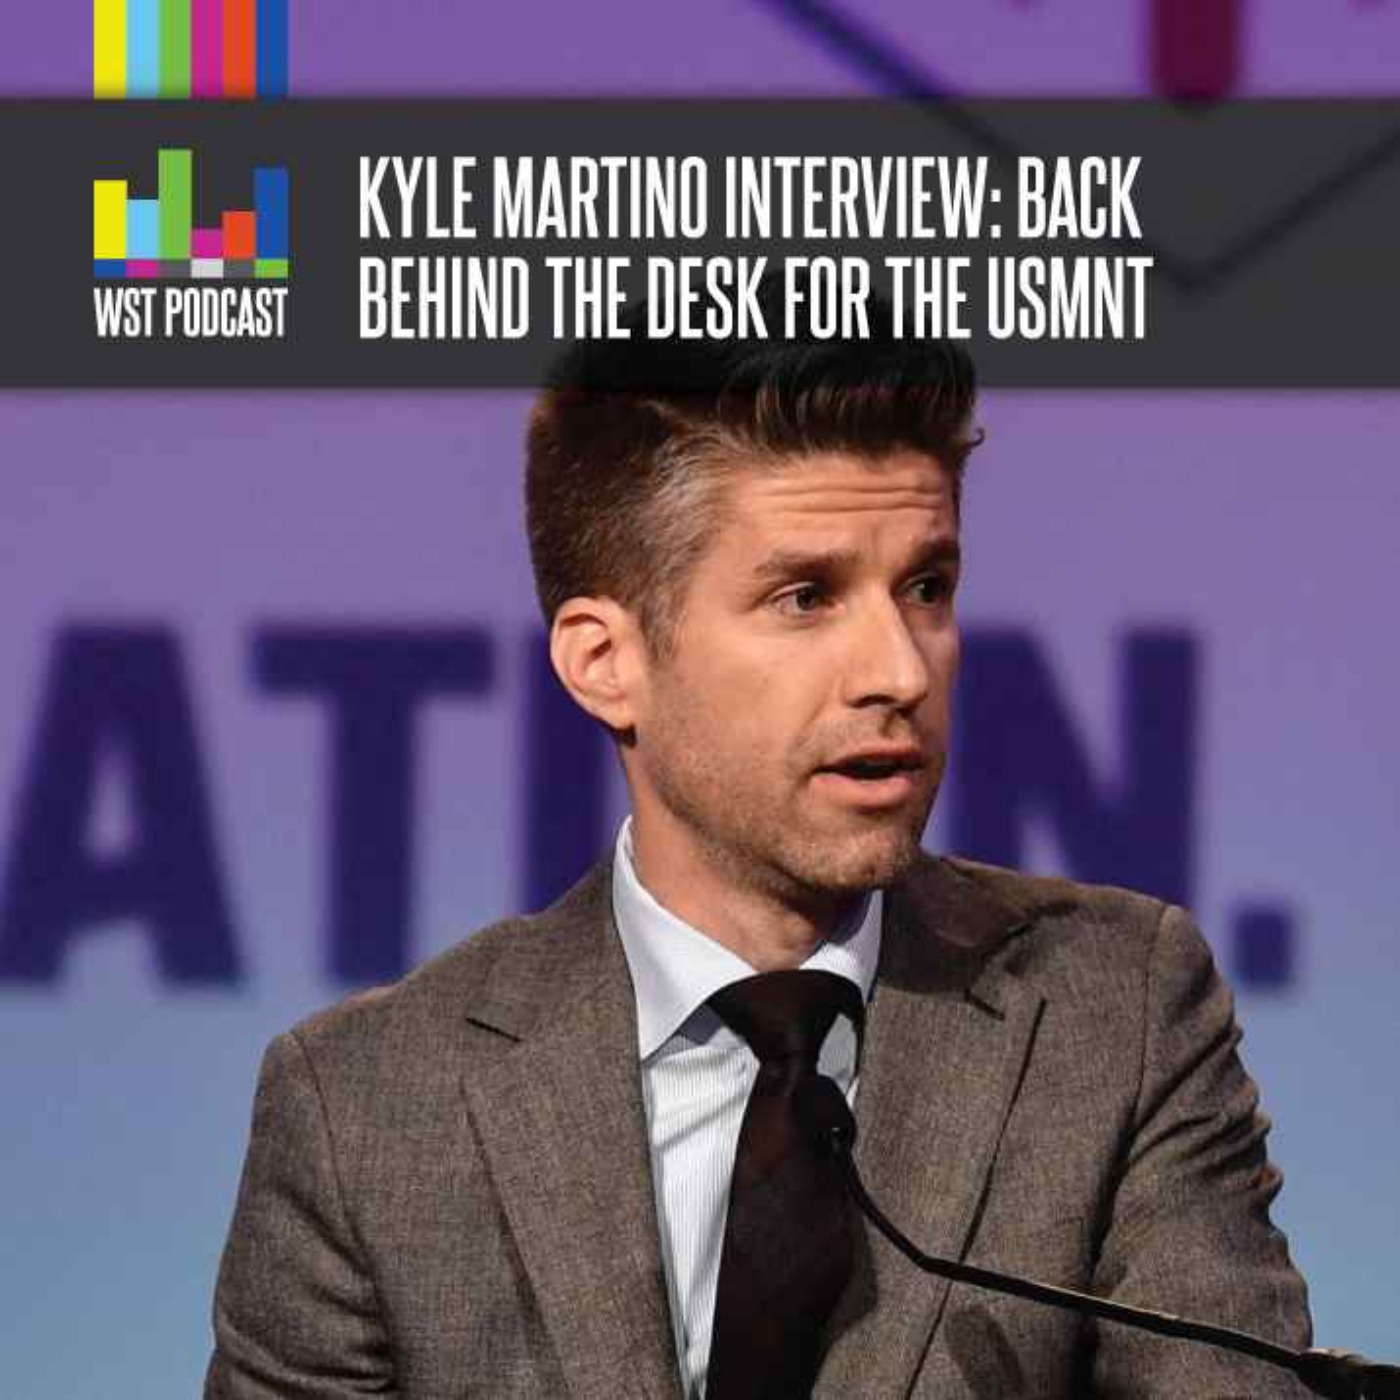 Kyle Martino Interview: Back behind the desk for the USMNT